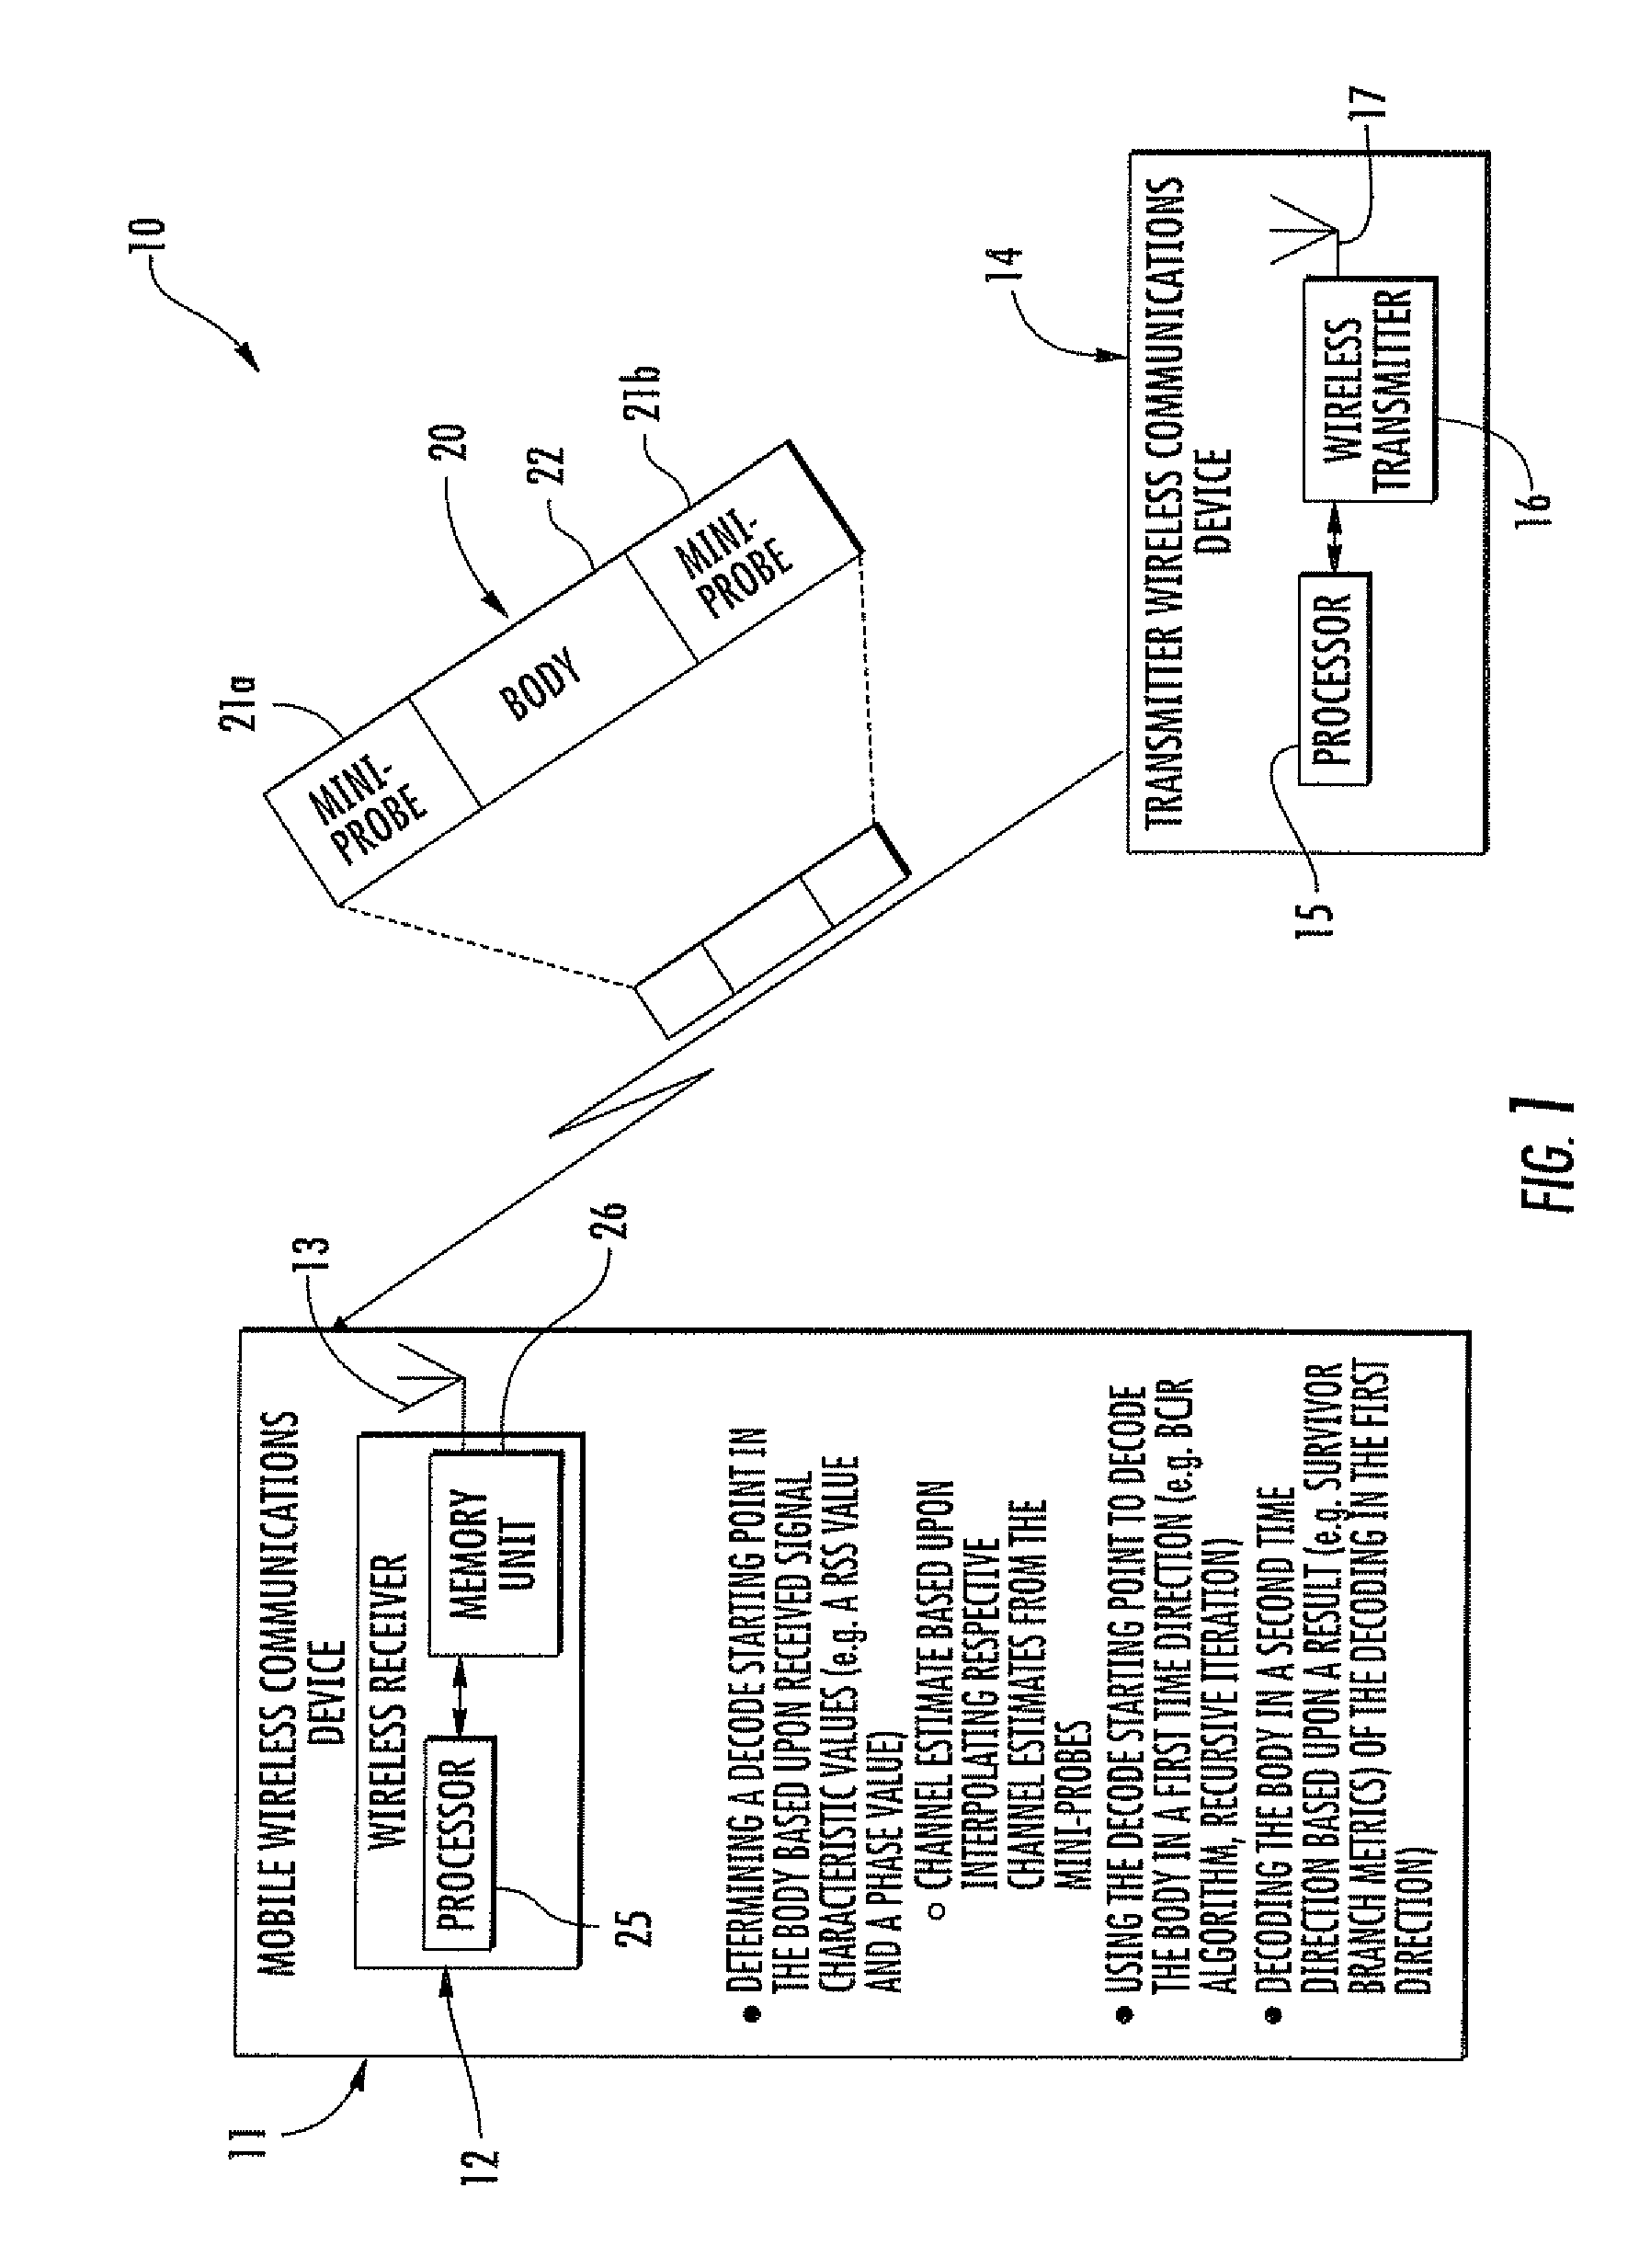 Mobile wireless communications device and receiver with demodulation and related methods